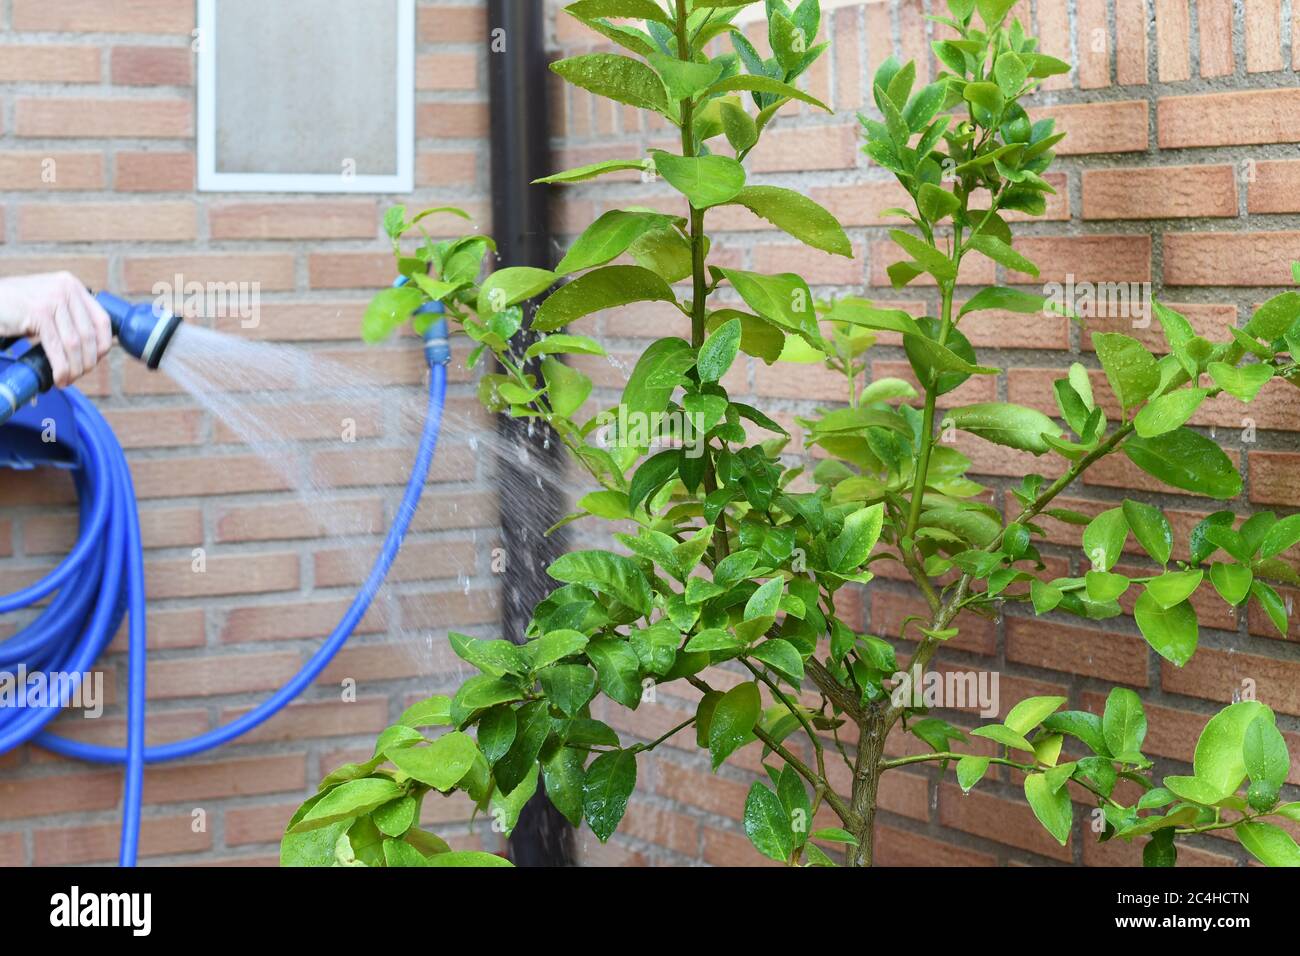 Watering a lime tree in a garden Stock Photo